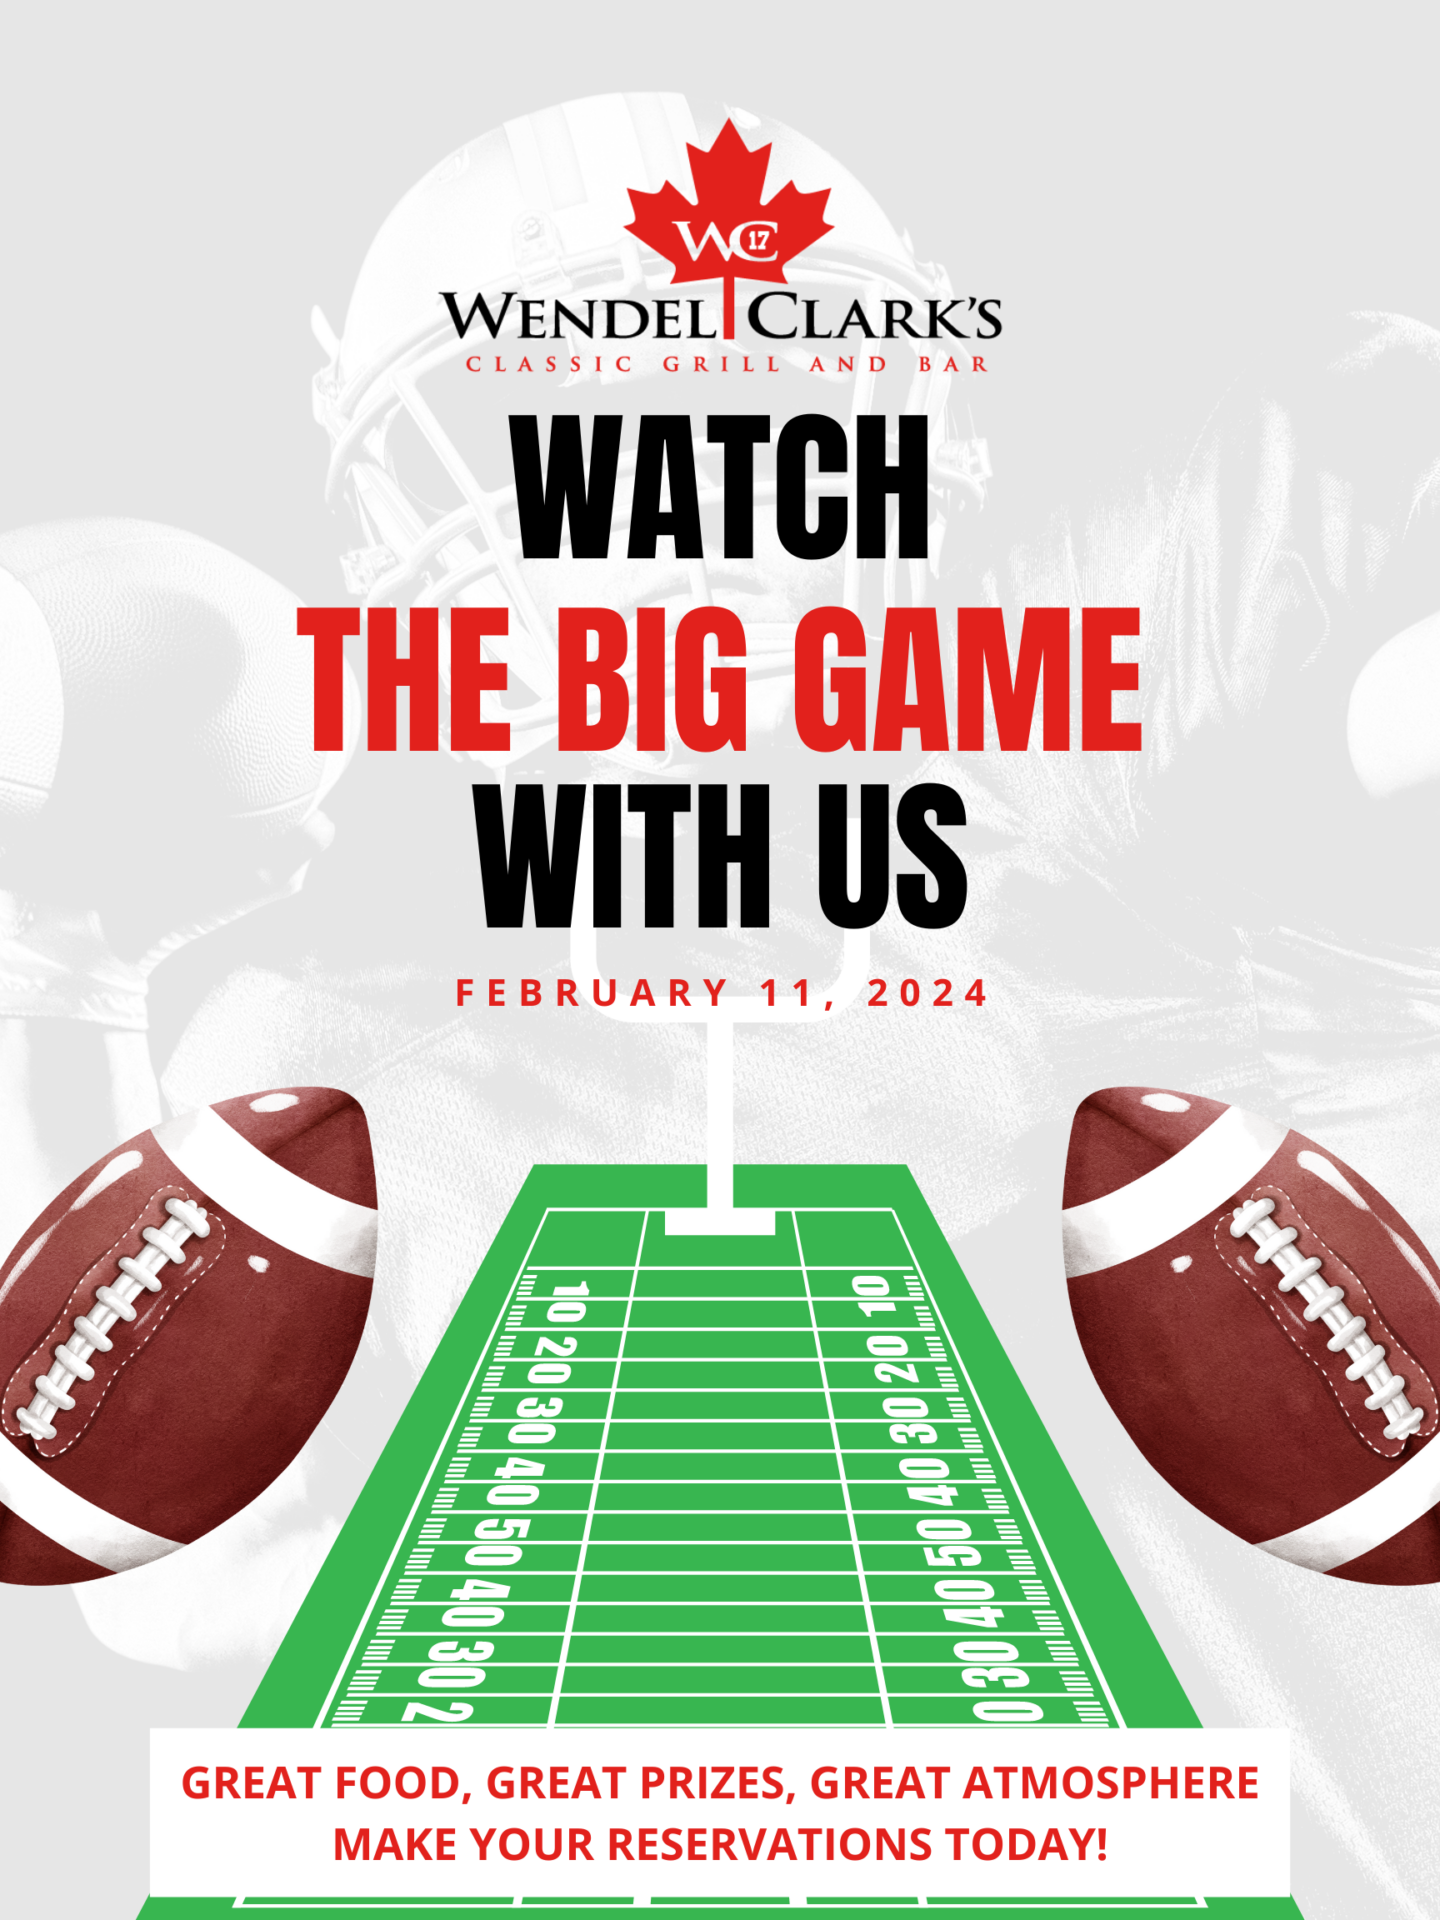 Watch the big game with us - February 11, 2024. Book a table now!